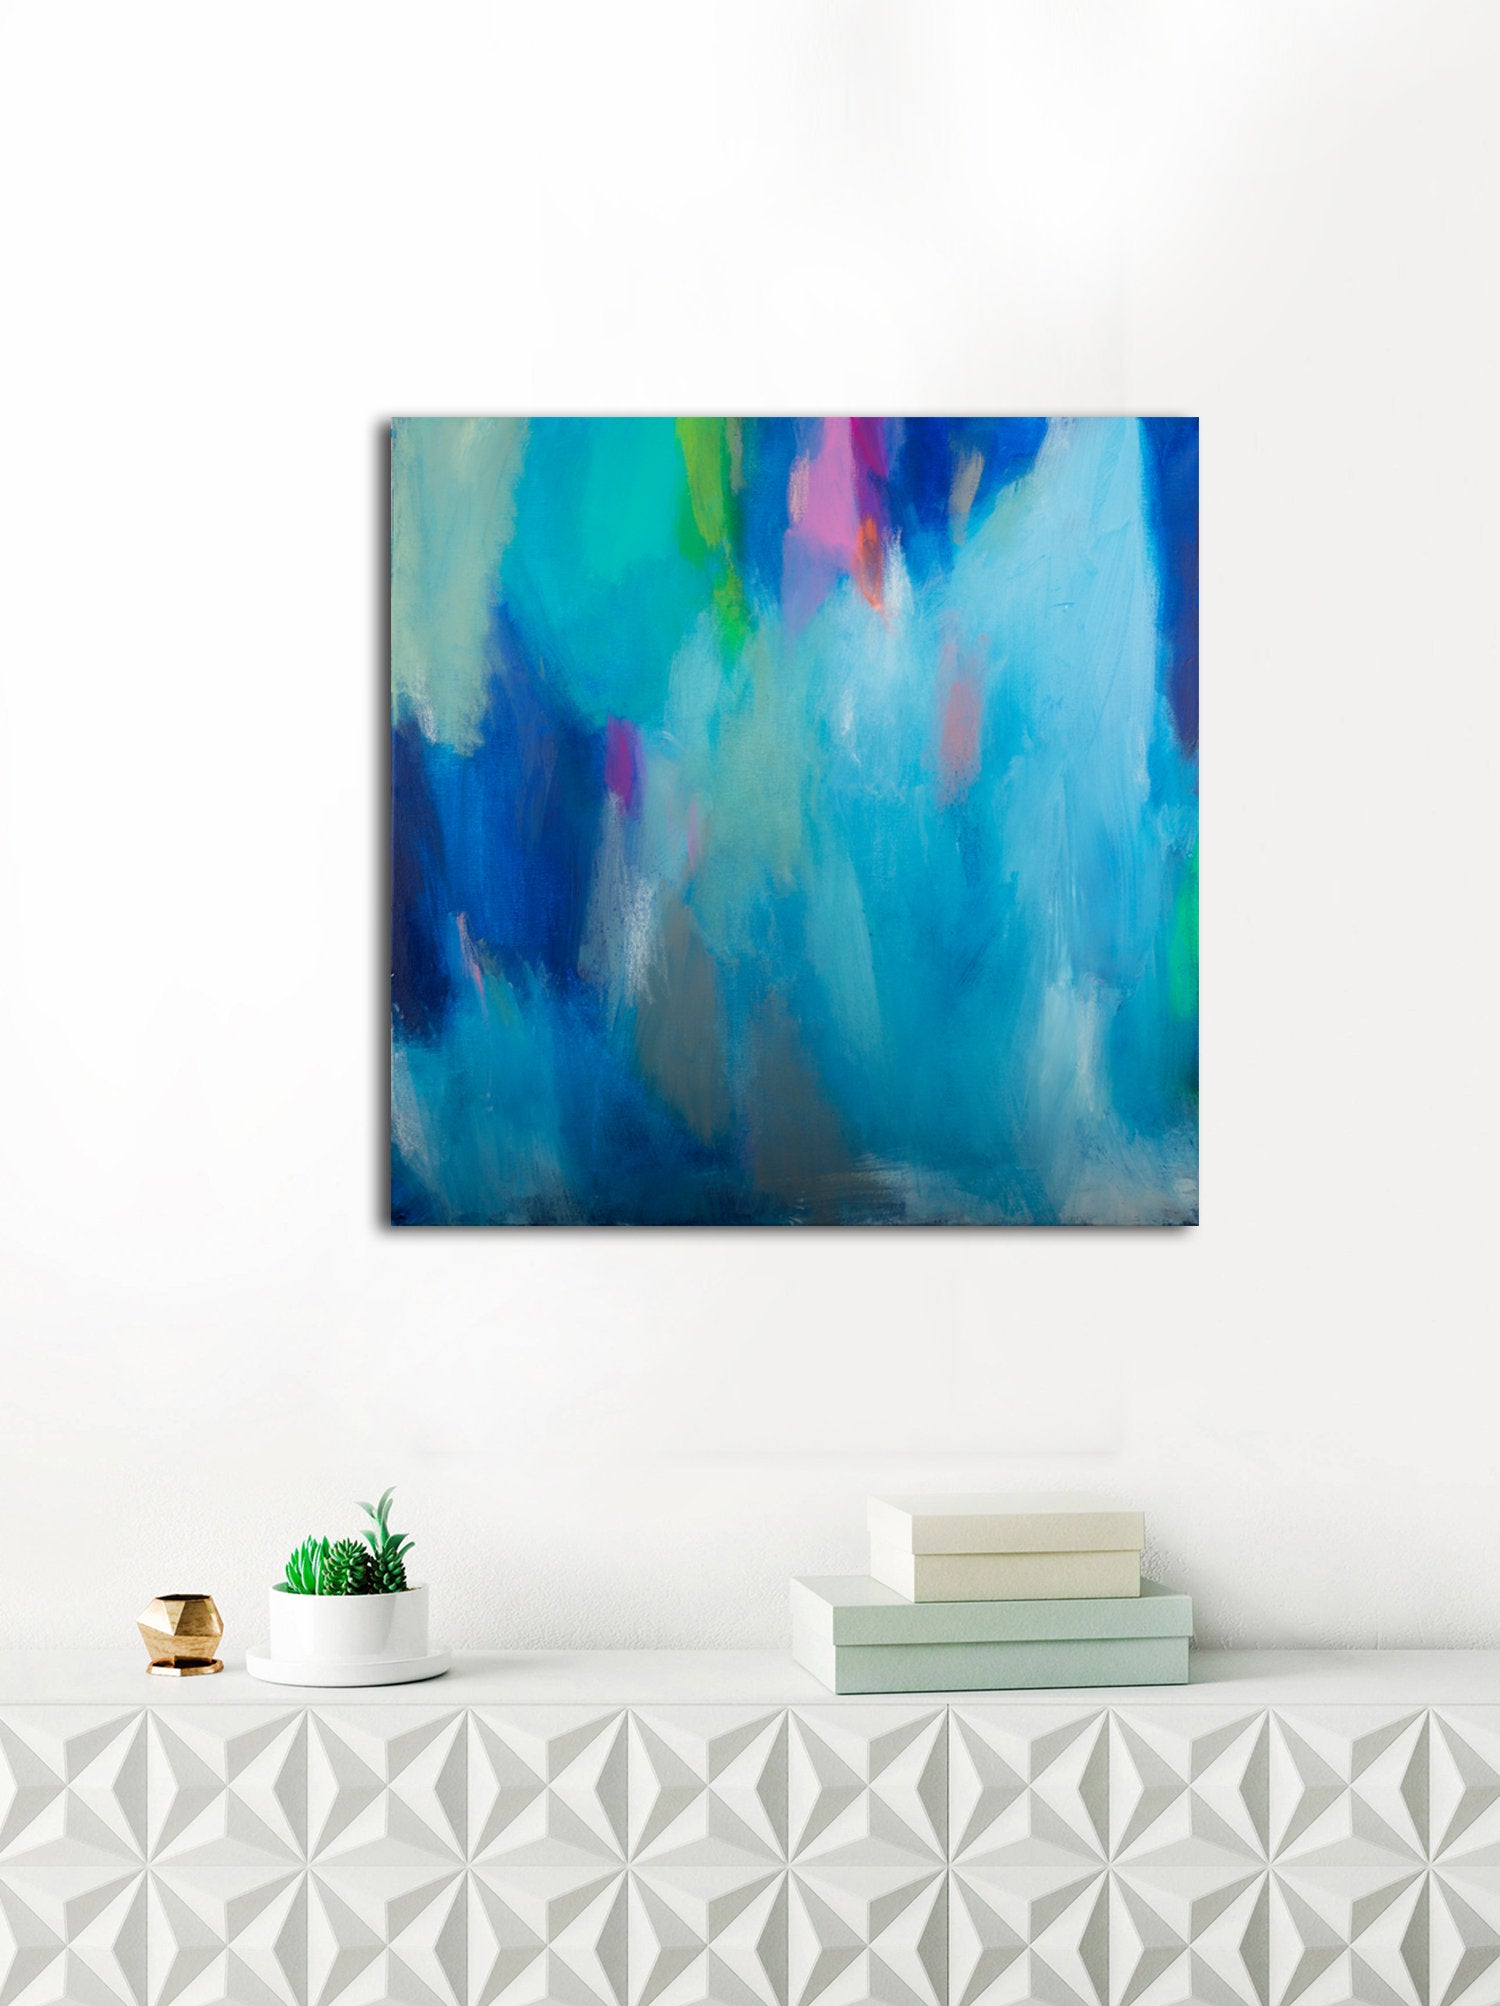 Turquoise blue Original abstract painting, Large abstract wall art on canvas, Impressionist landscape, Abstract art by Camilo Matti - camilomattis.com